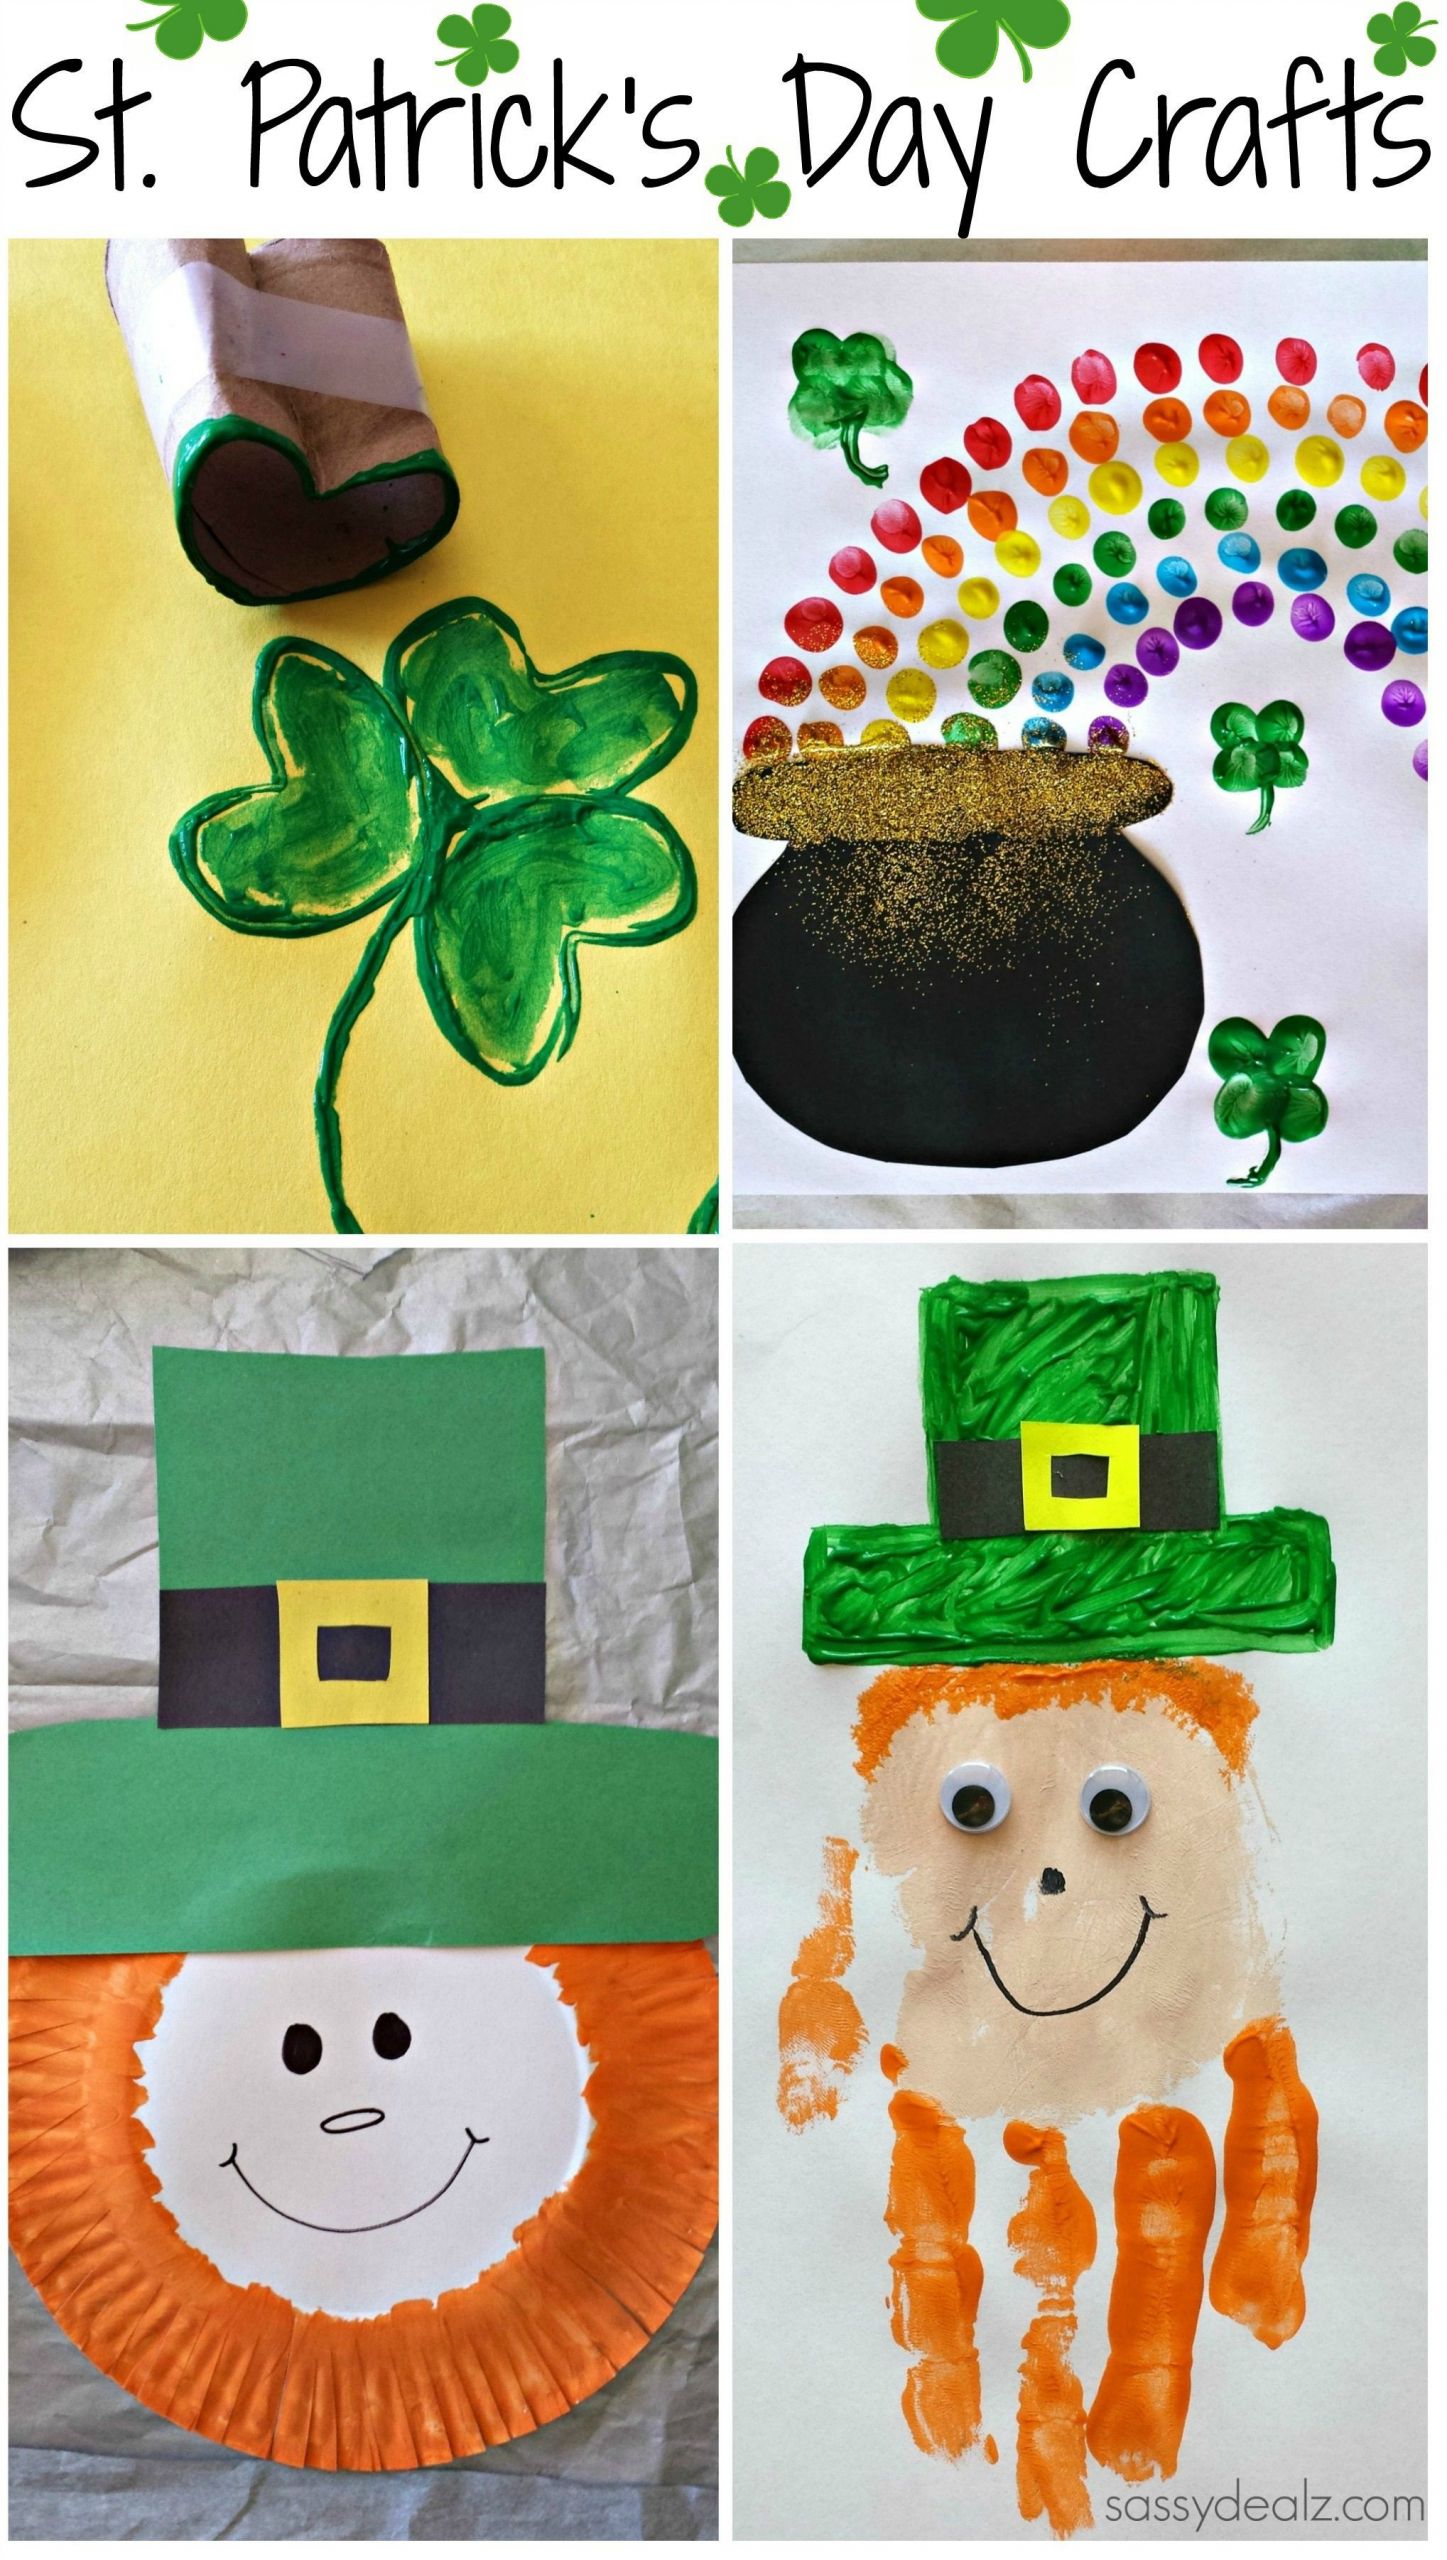 Saint Patrick Day Arts And Crafts
 Easy St Patrick s Day Crafts For Kids